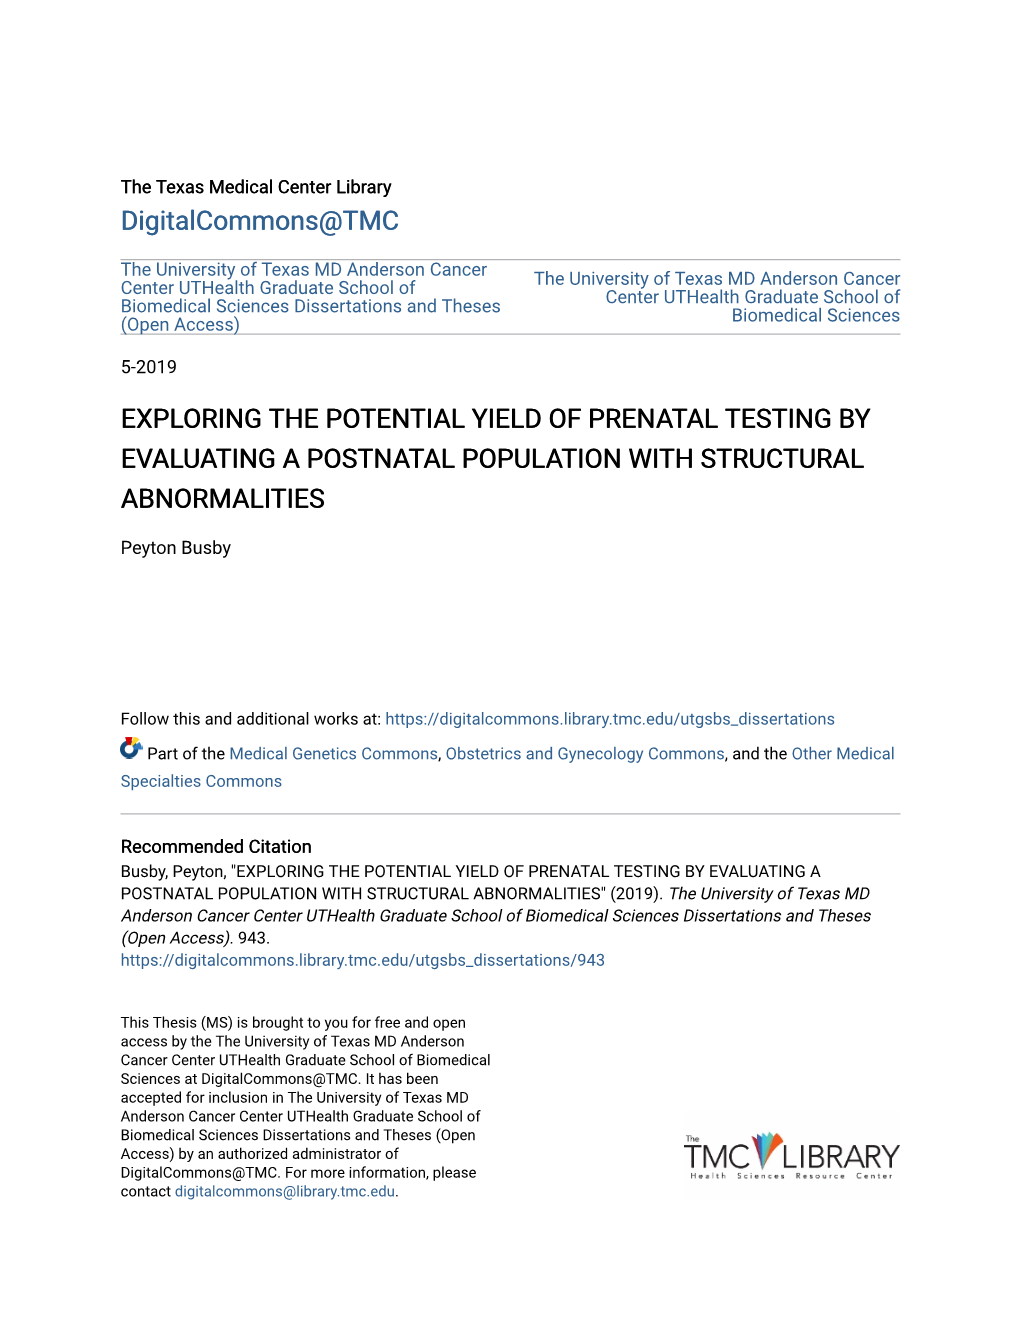 Exploring the Potential Yield of Prenatal Testing by Evaluating a Postnatal Population with Structural Abnormalities